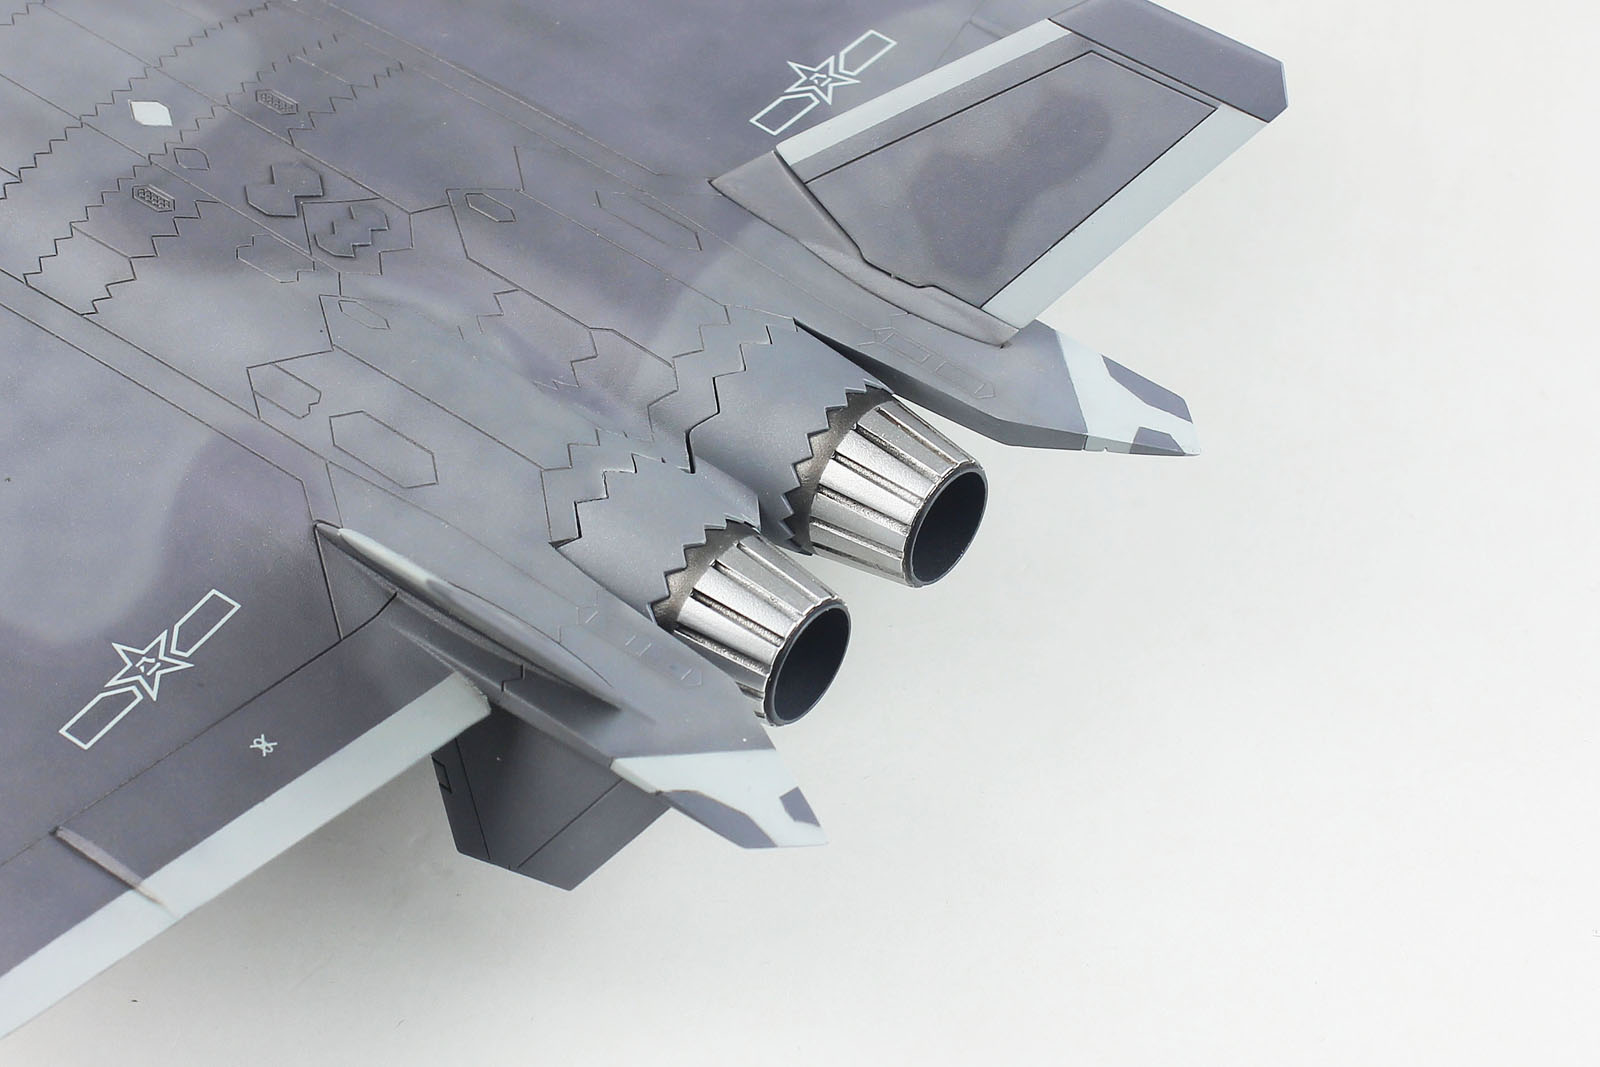 1/72 Chinese J-20 "Mighty Dragon" (in Service) - Click Image to Close